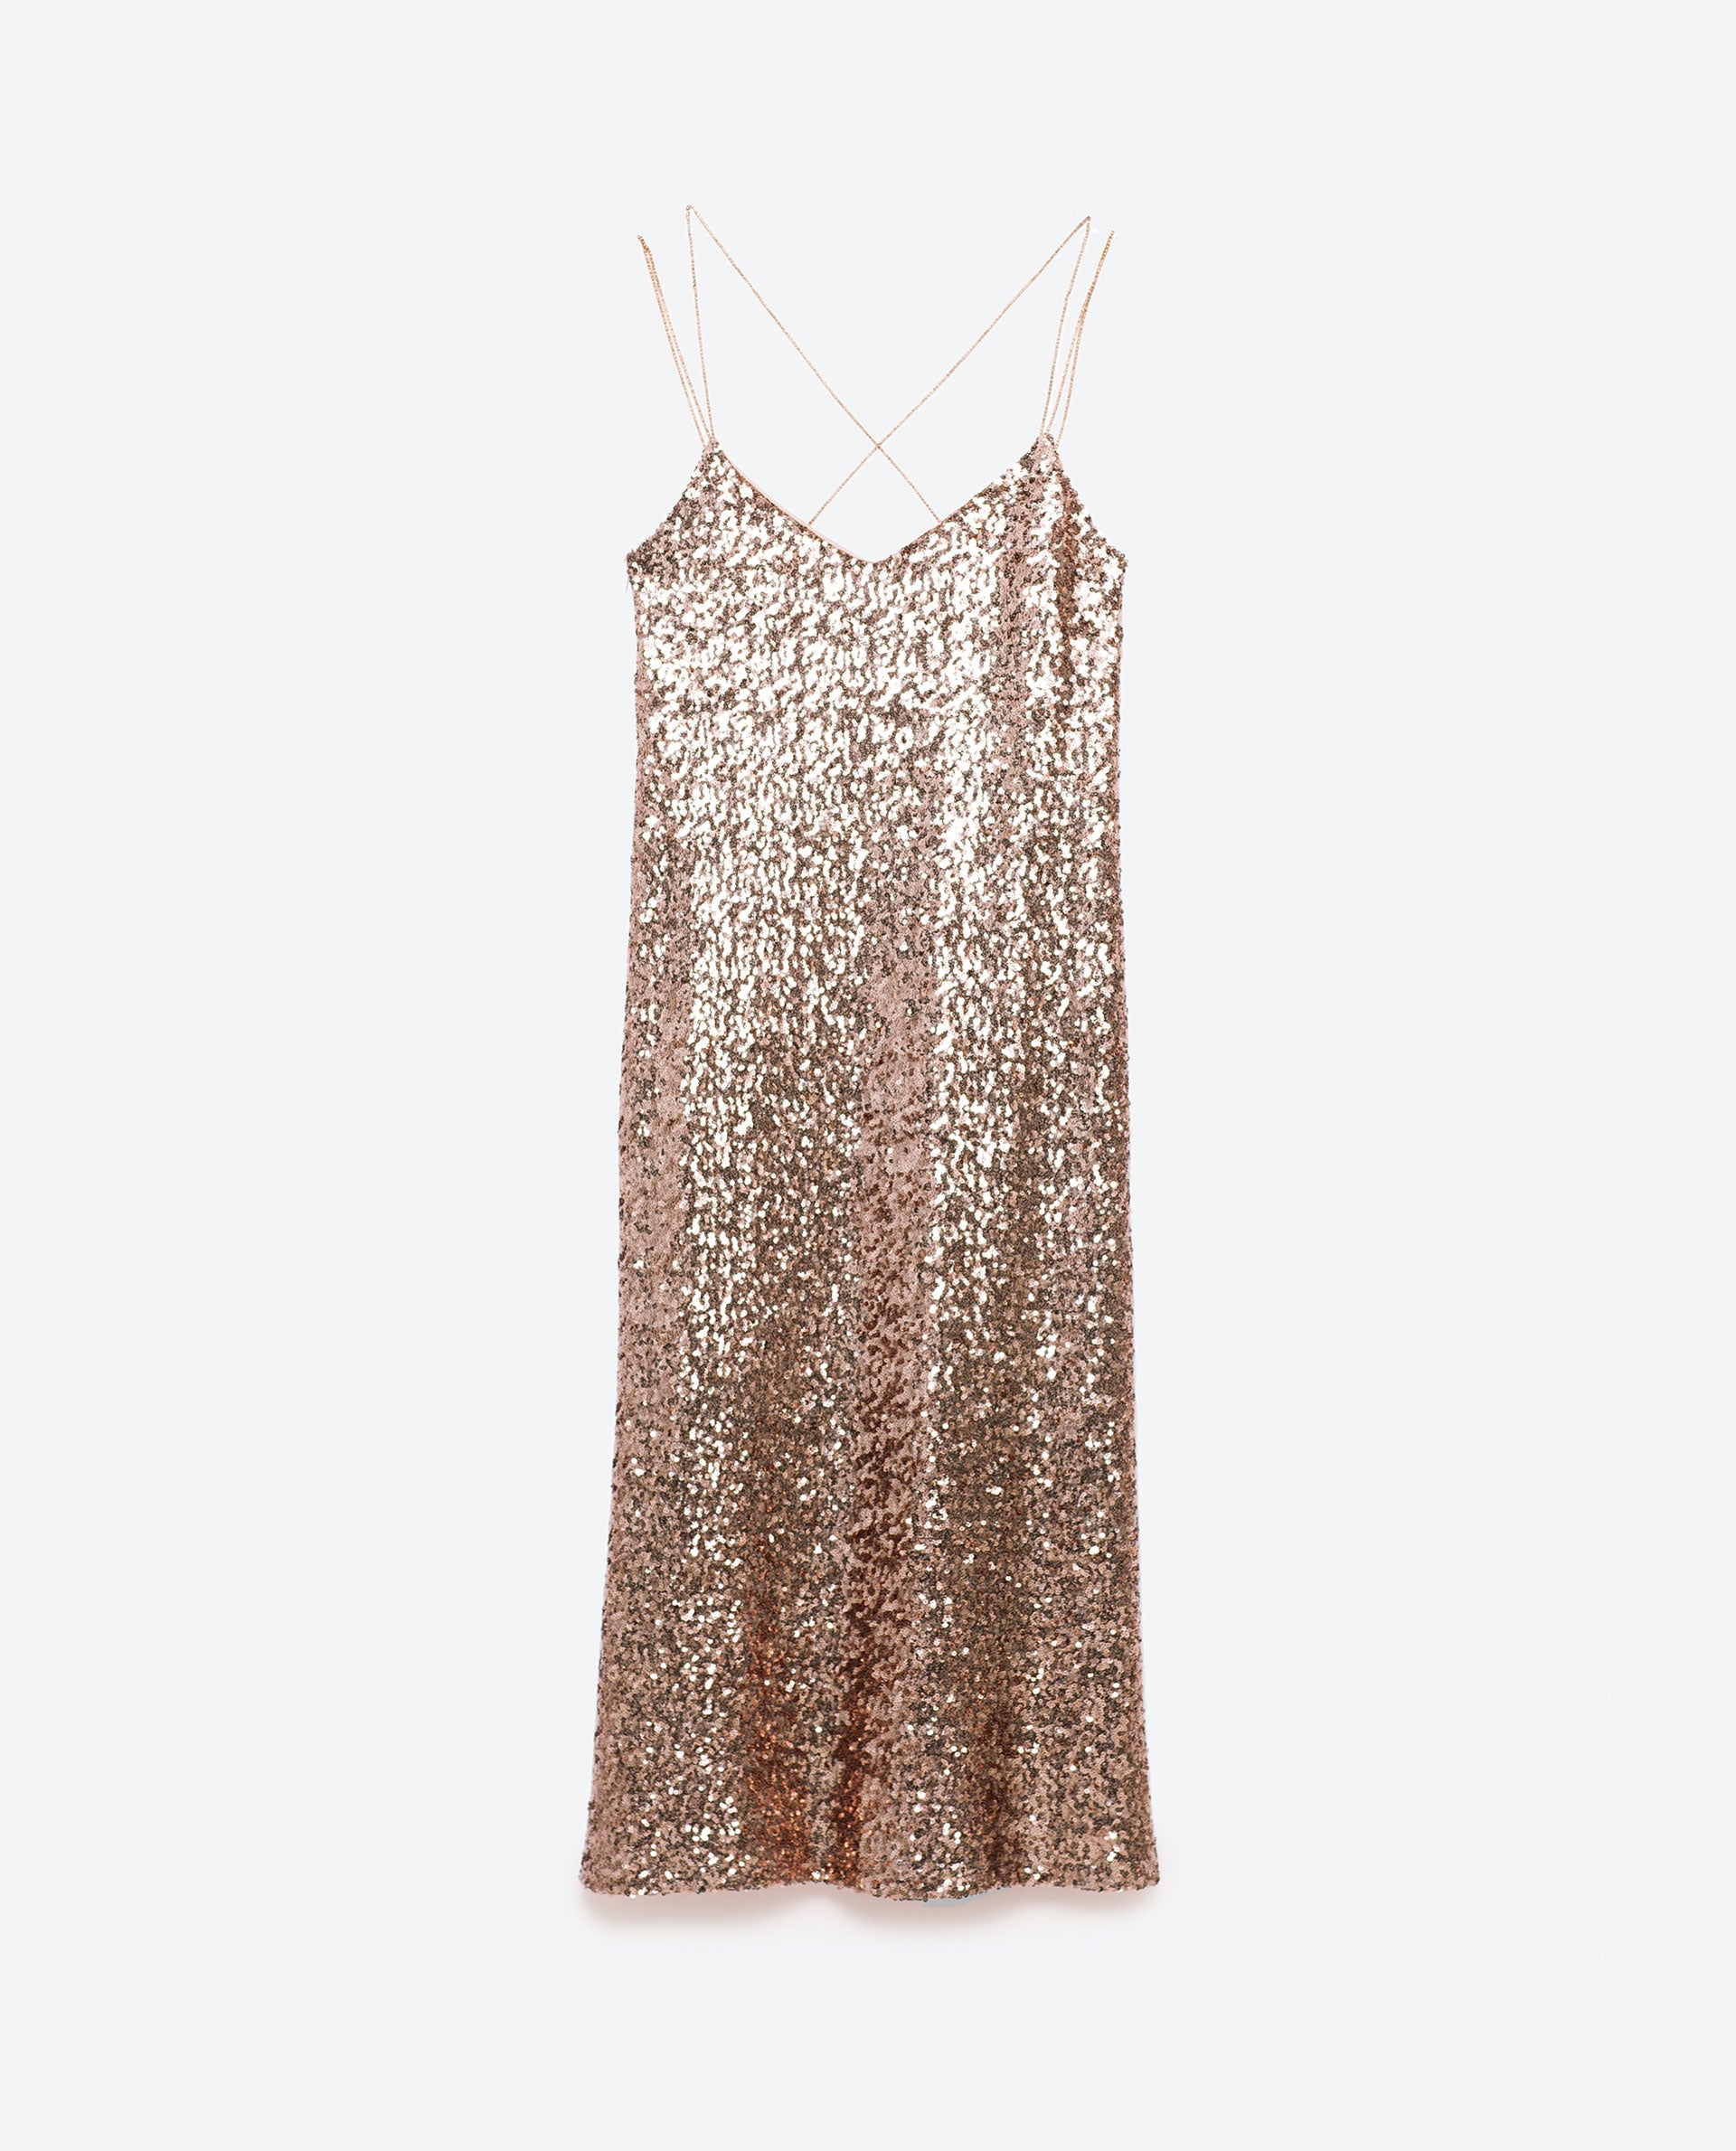 The 10 Dresses That Will Turn Every Head in the Room on NYE